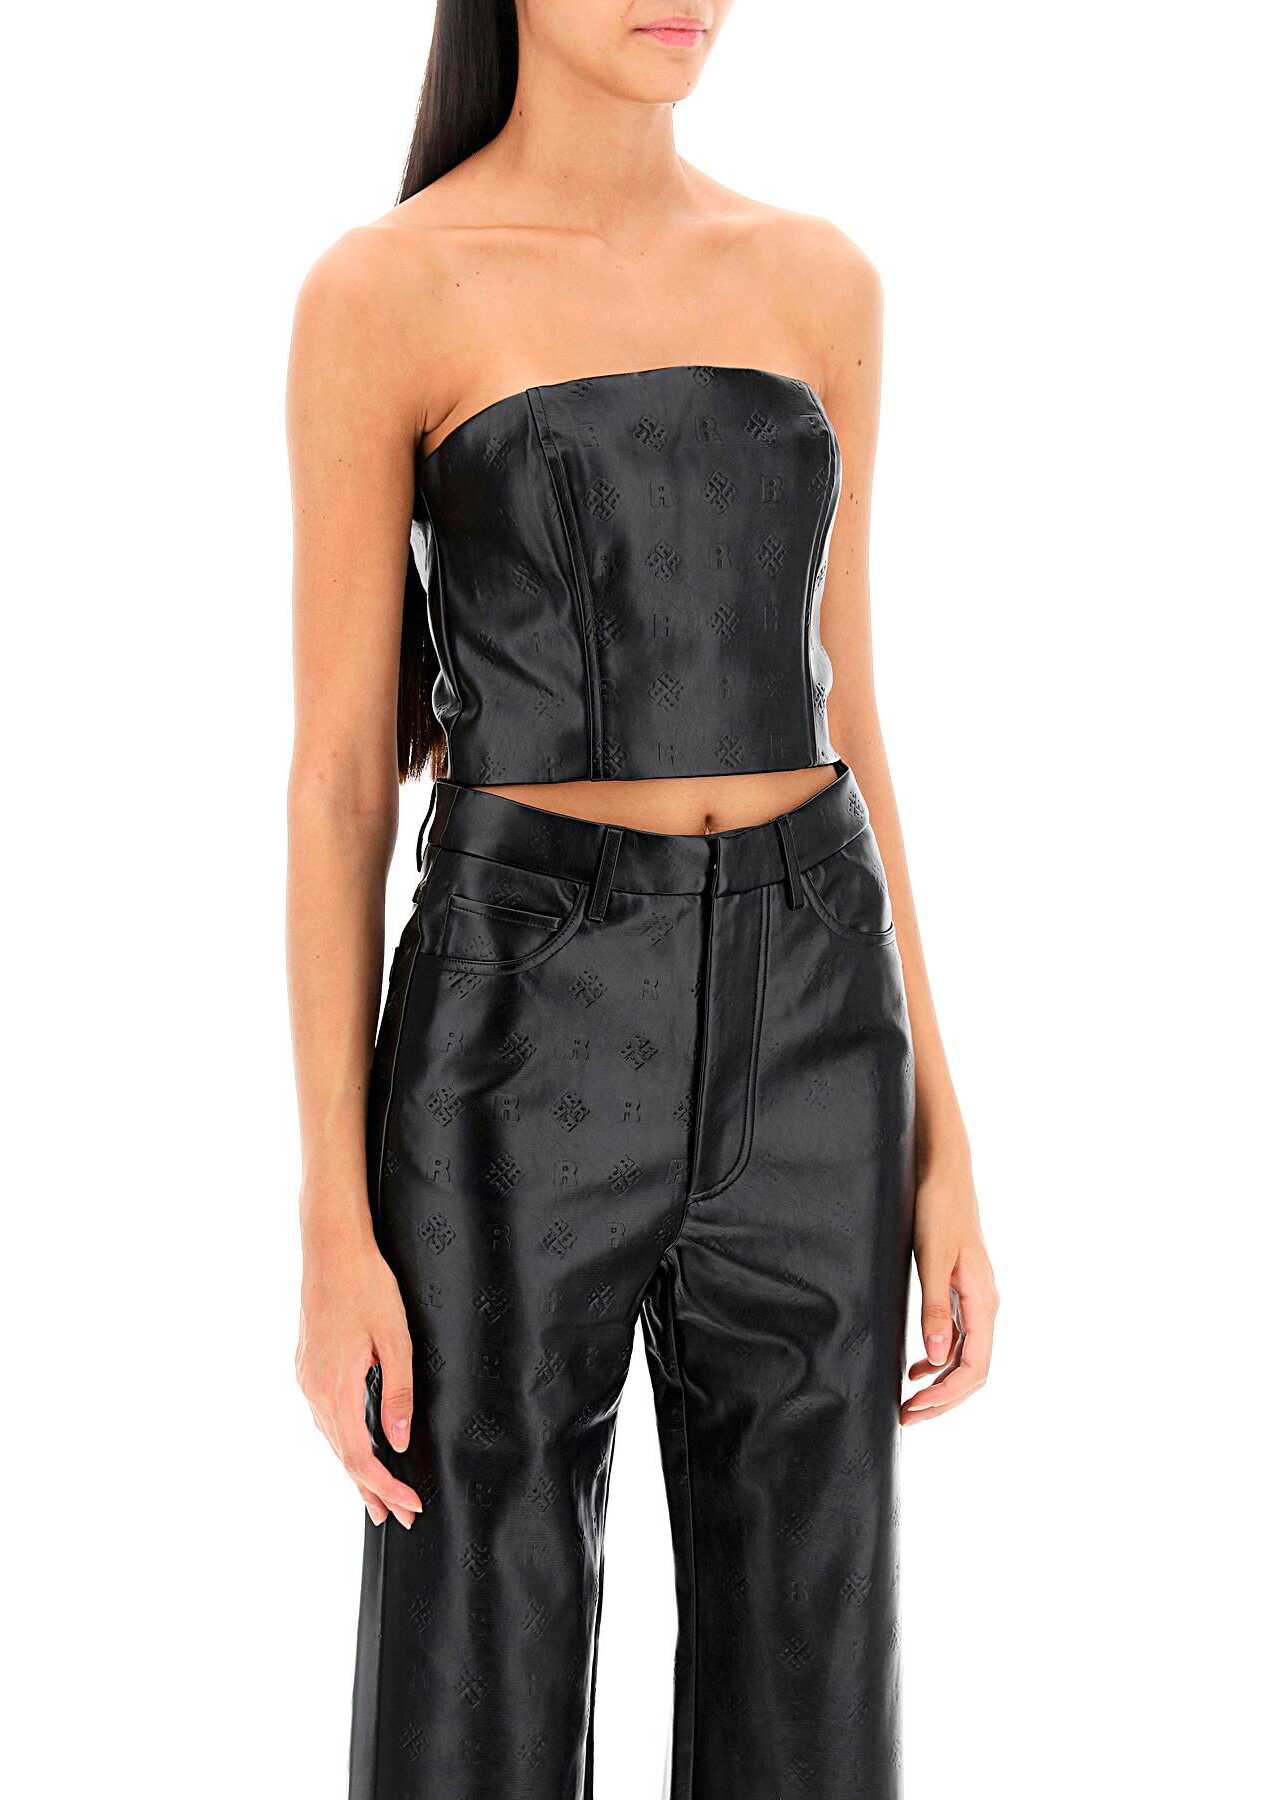 ROTATE Birger Christensen Faux-Leather Cropped Top BLACK